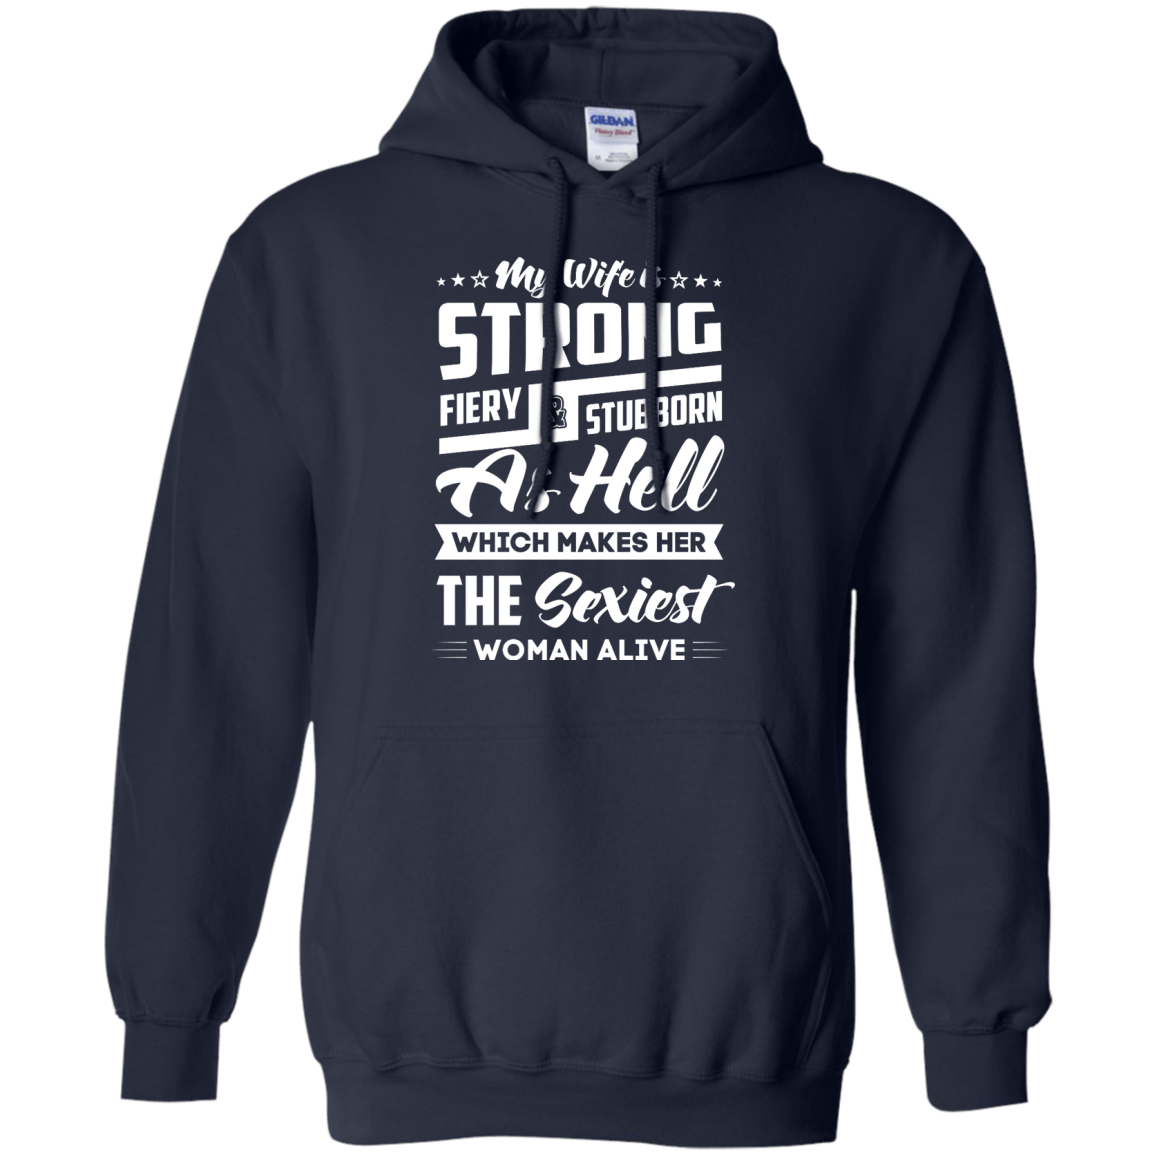 My Wife Is Strong Fiery And Stubborn As Hell Shirt & Hoodie ...